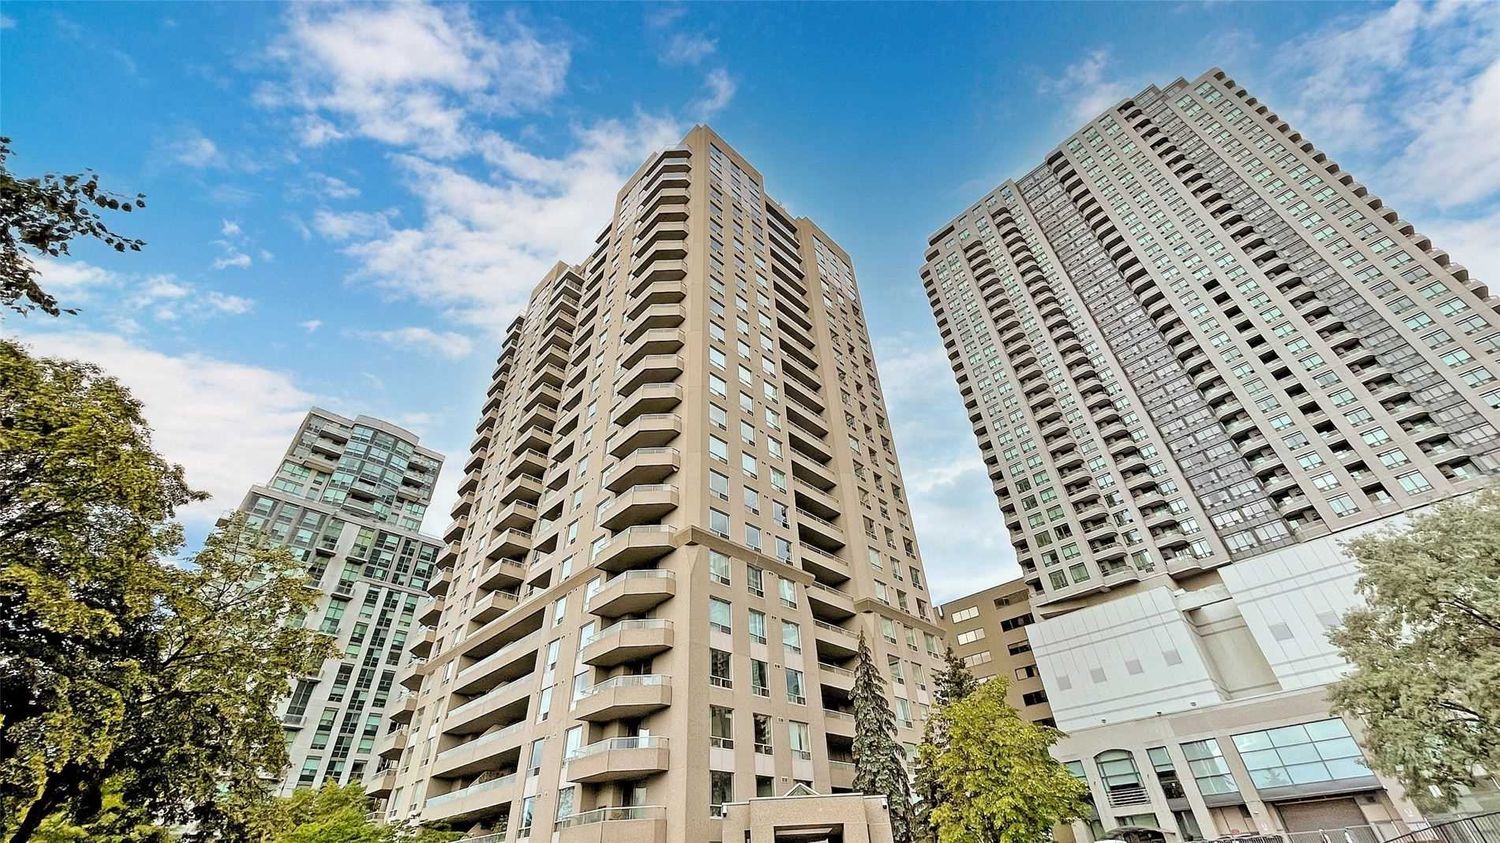 18 Hillcrest Avenue. Empress Plaza II Condos is located in  North York, Toronto - image #2 of 2